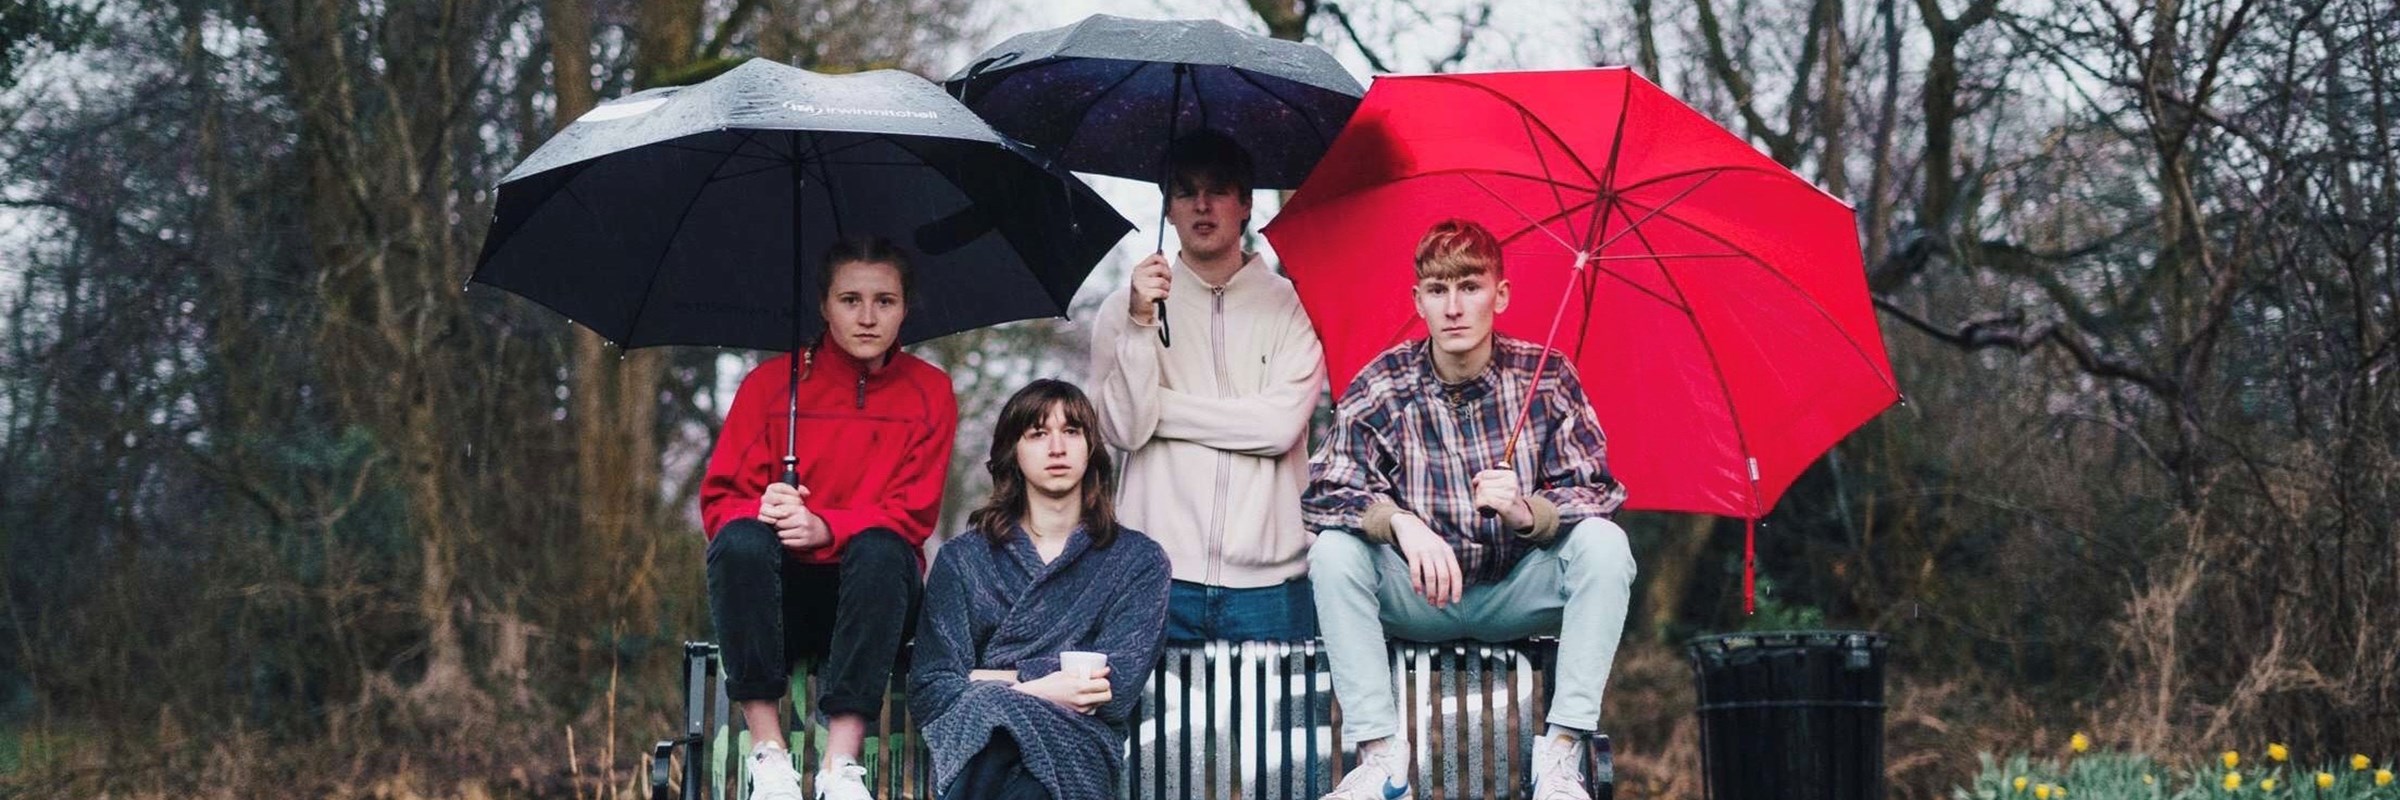 Image of the 4 band members in a park sat on a bench with three umbrellas over them